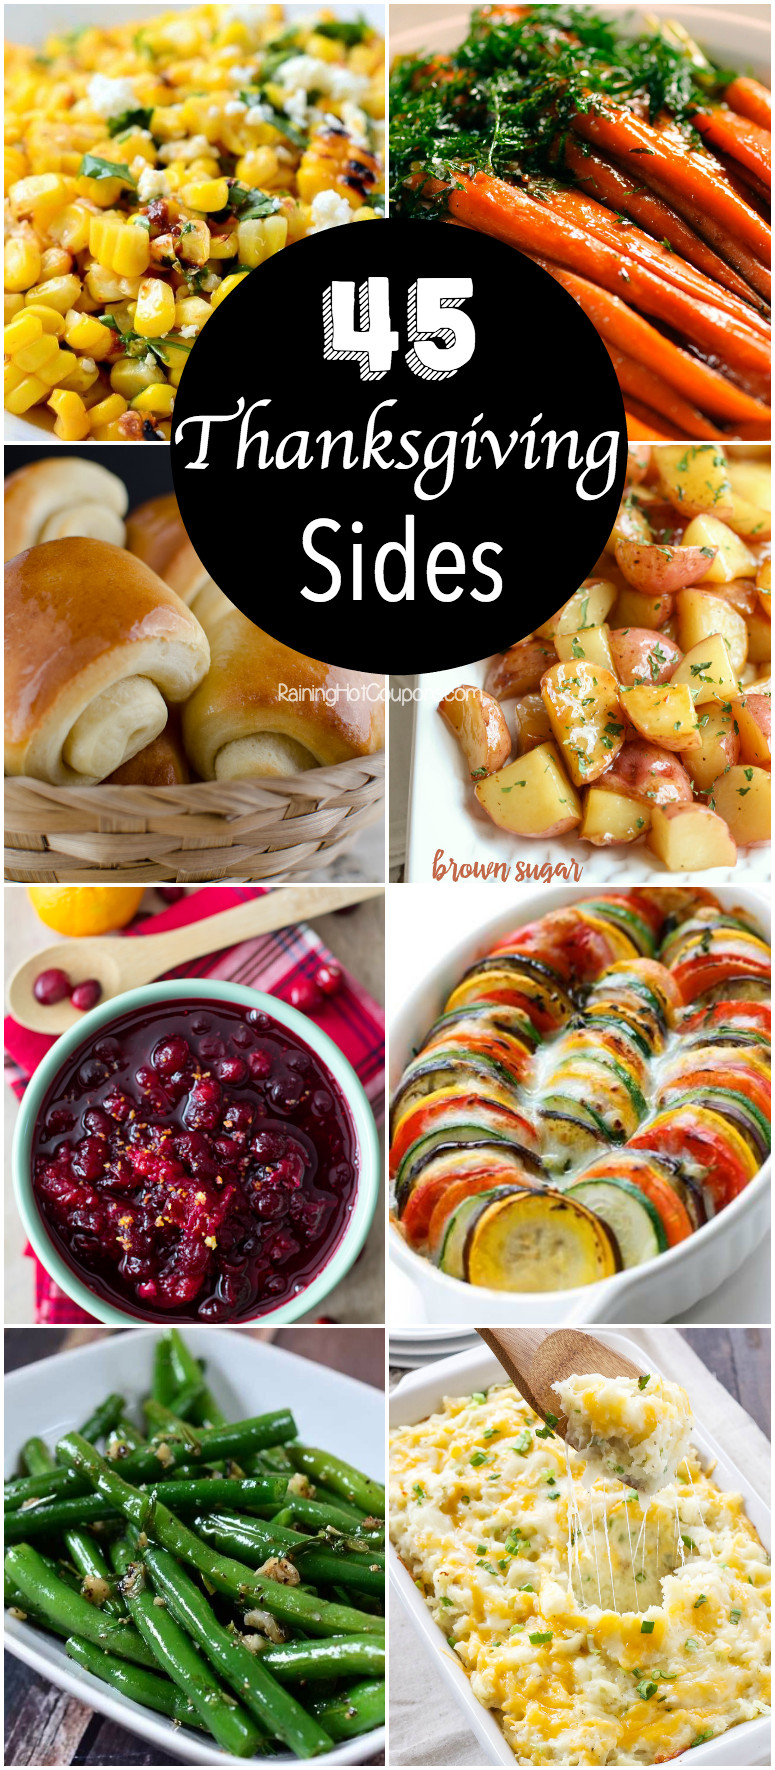 Easy Side Dishes For Thanksgiving Dinner
 45 Thanksgiving Side Dishes